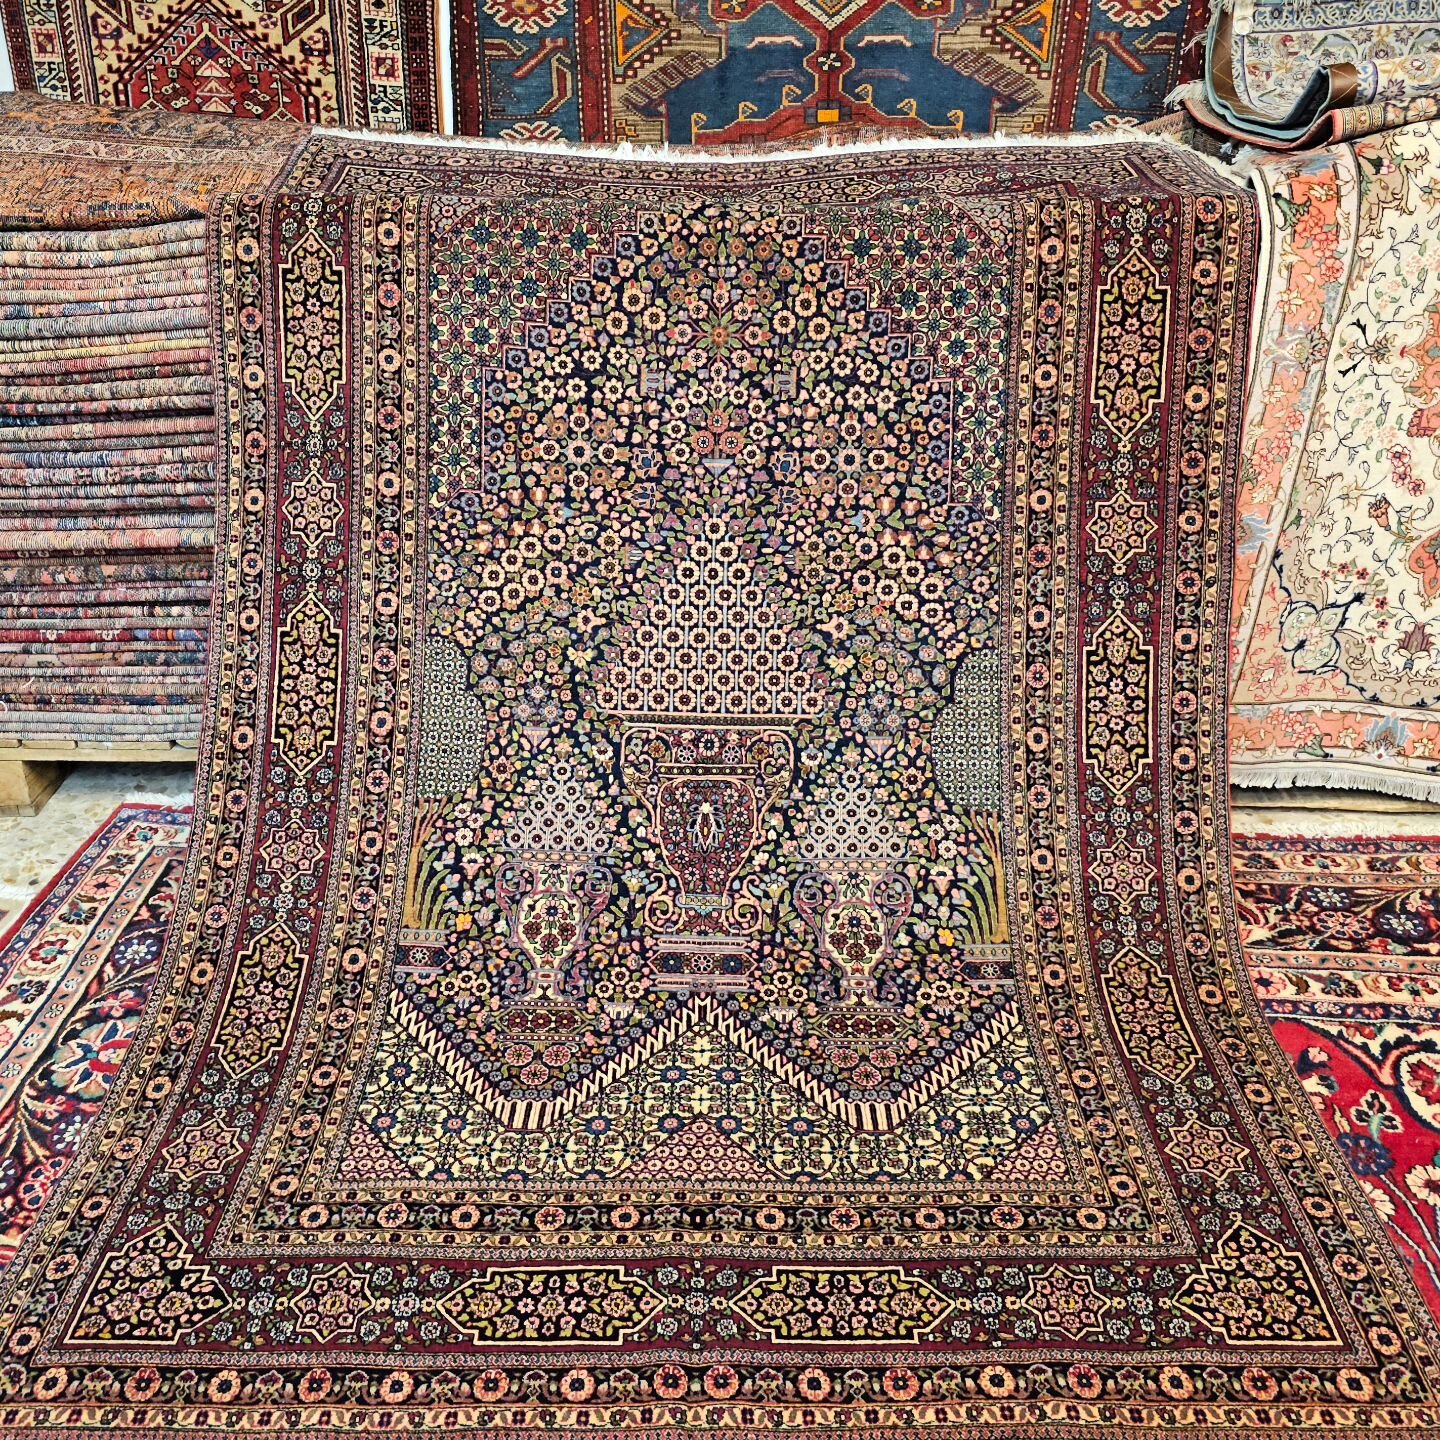 Once upon a time, certain things were possible, like the privacy and time you could have without much distraction and noise. Life was simpler and more tranquil, to the extent that some could spend years making beautiful rugs like this one here. One c